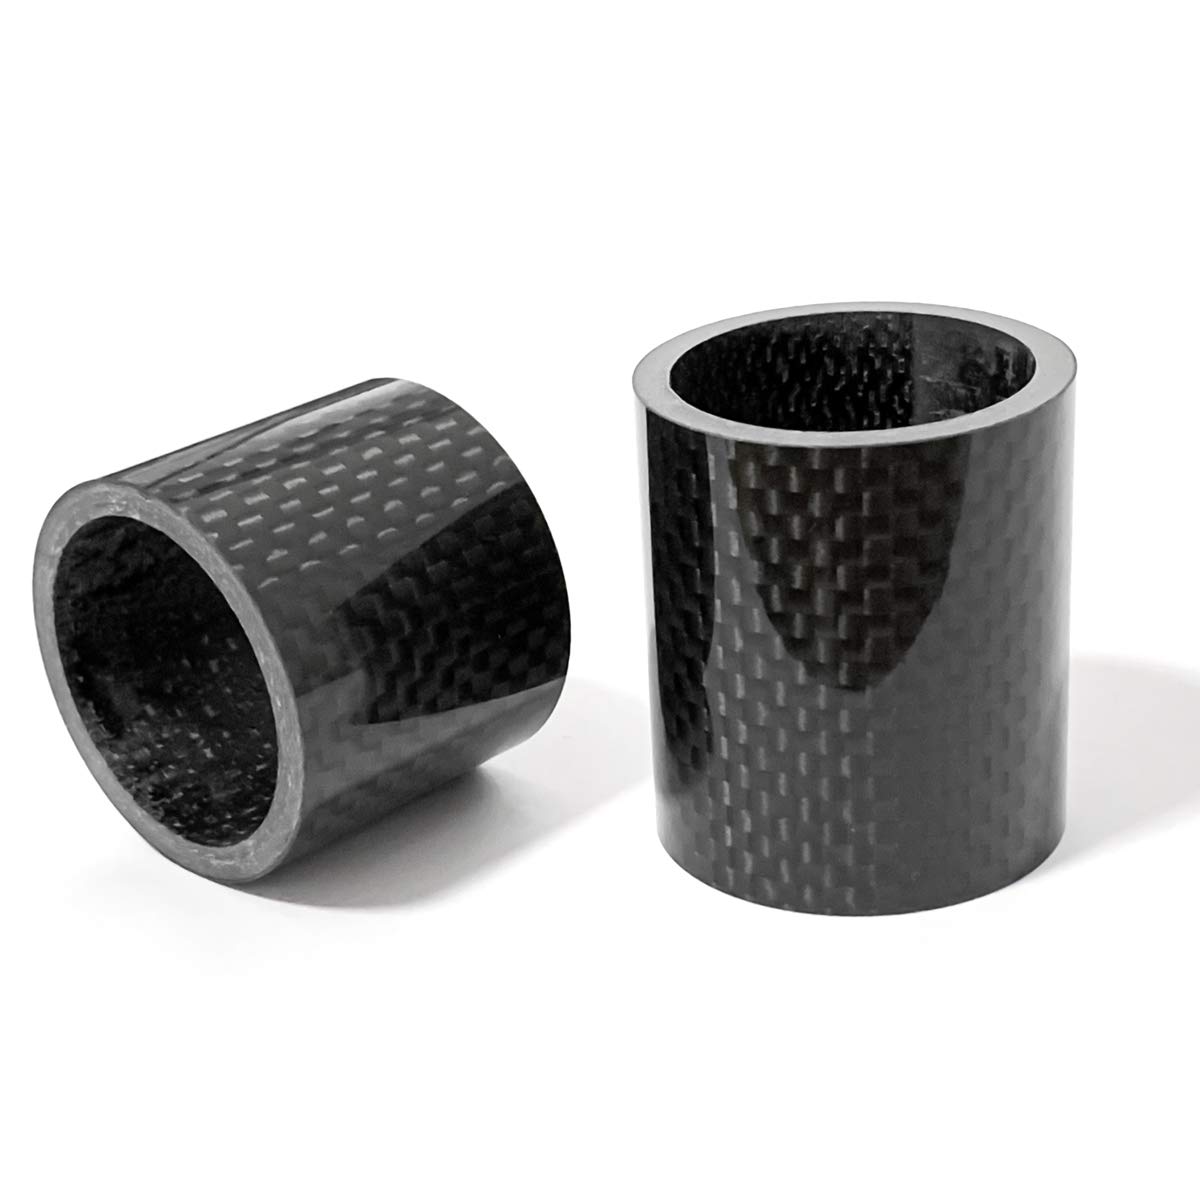 Farbetter 2 Pieces Bike Carbon Fiber Headset Spacer Bicycle Stem